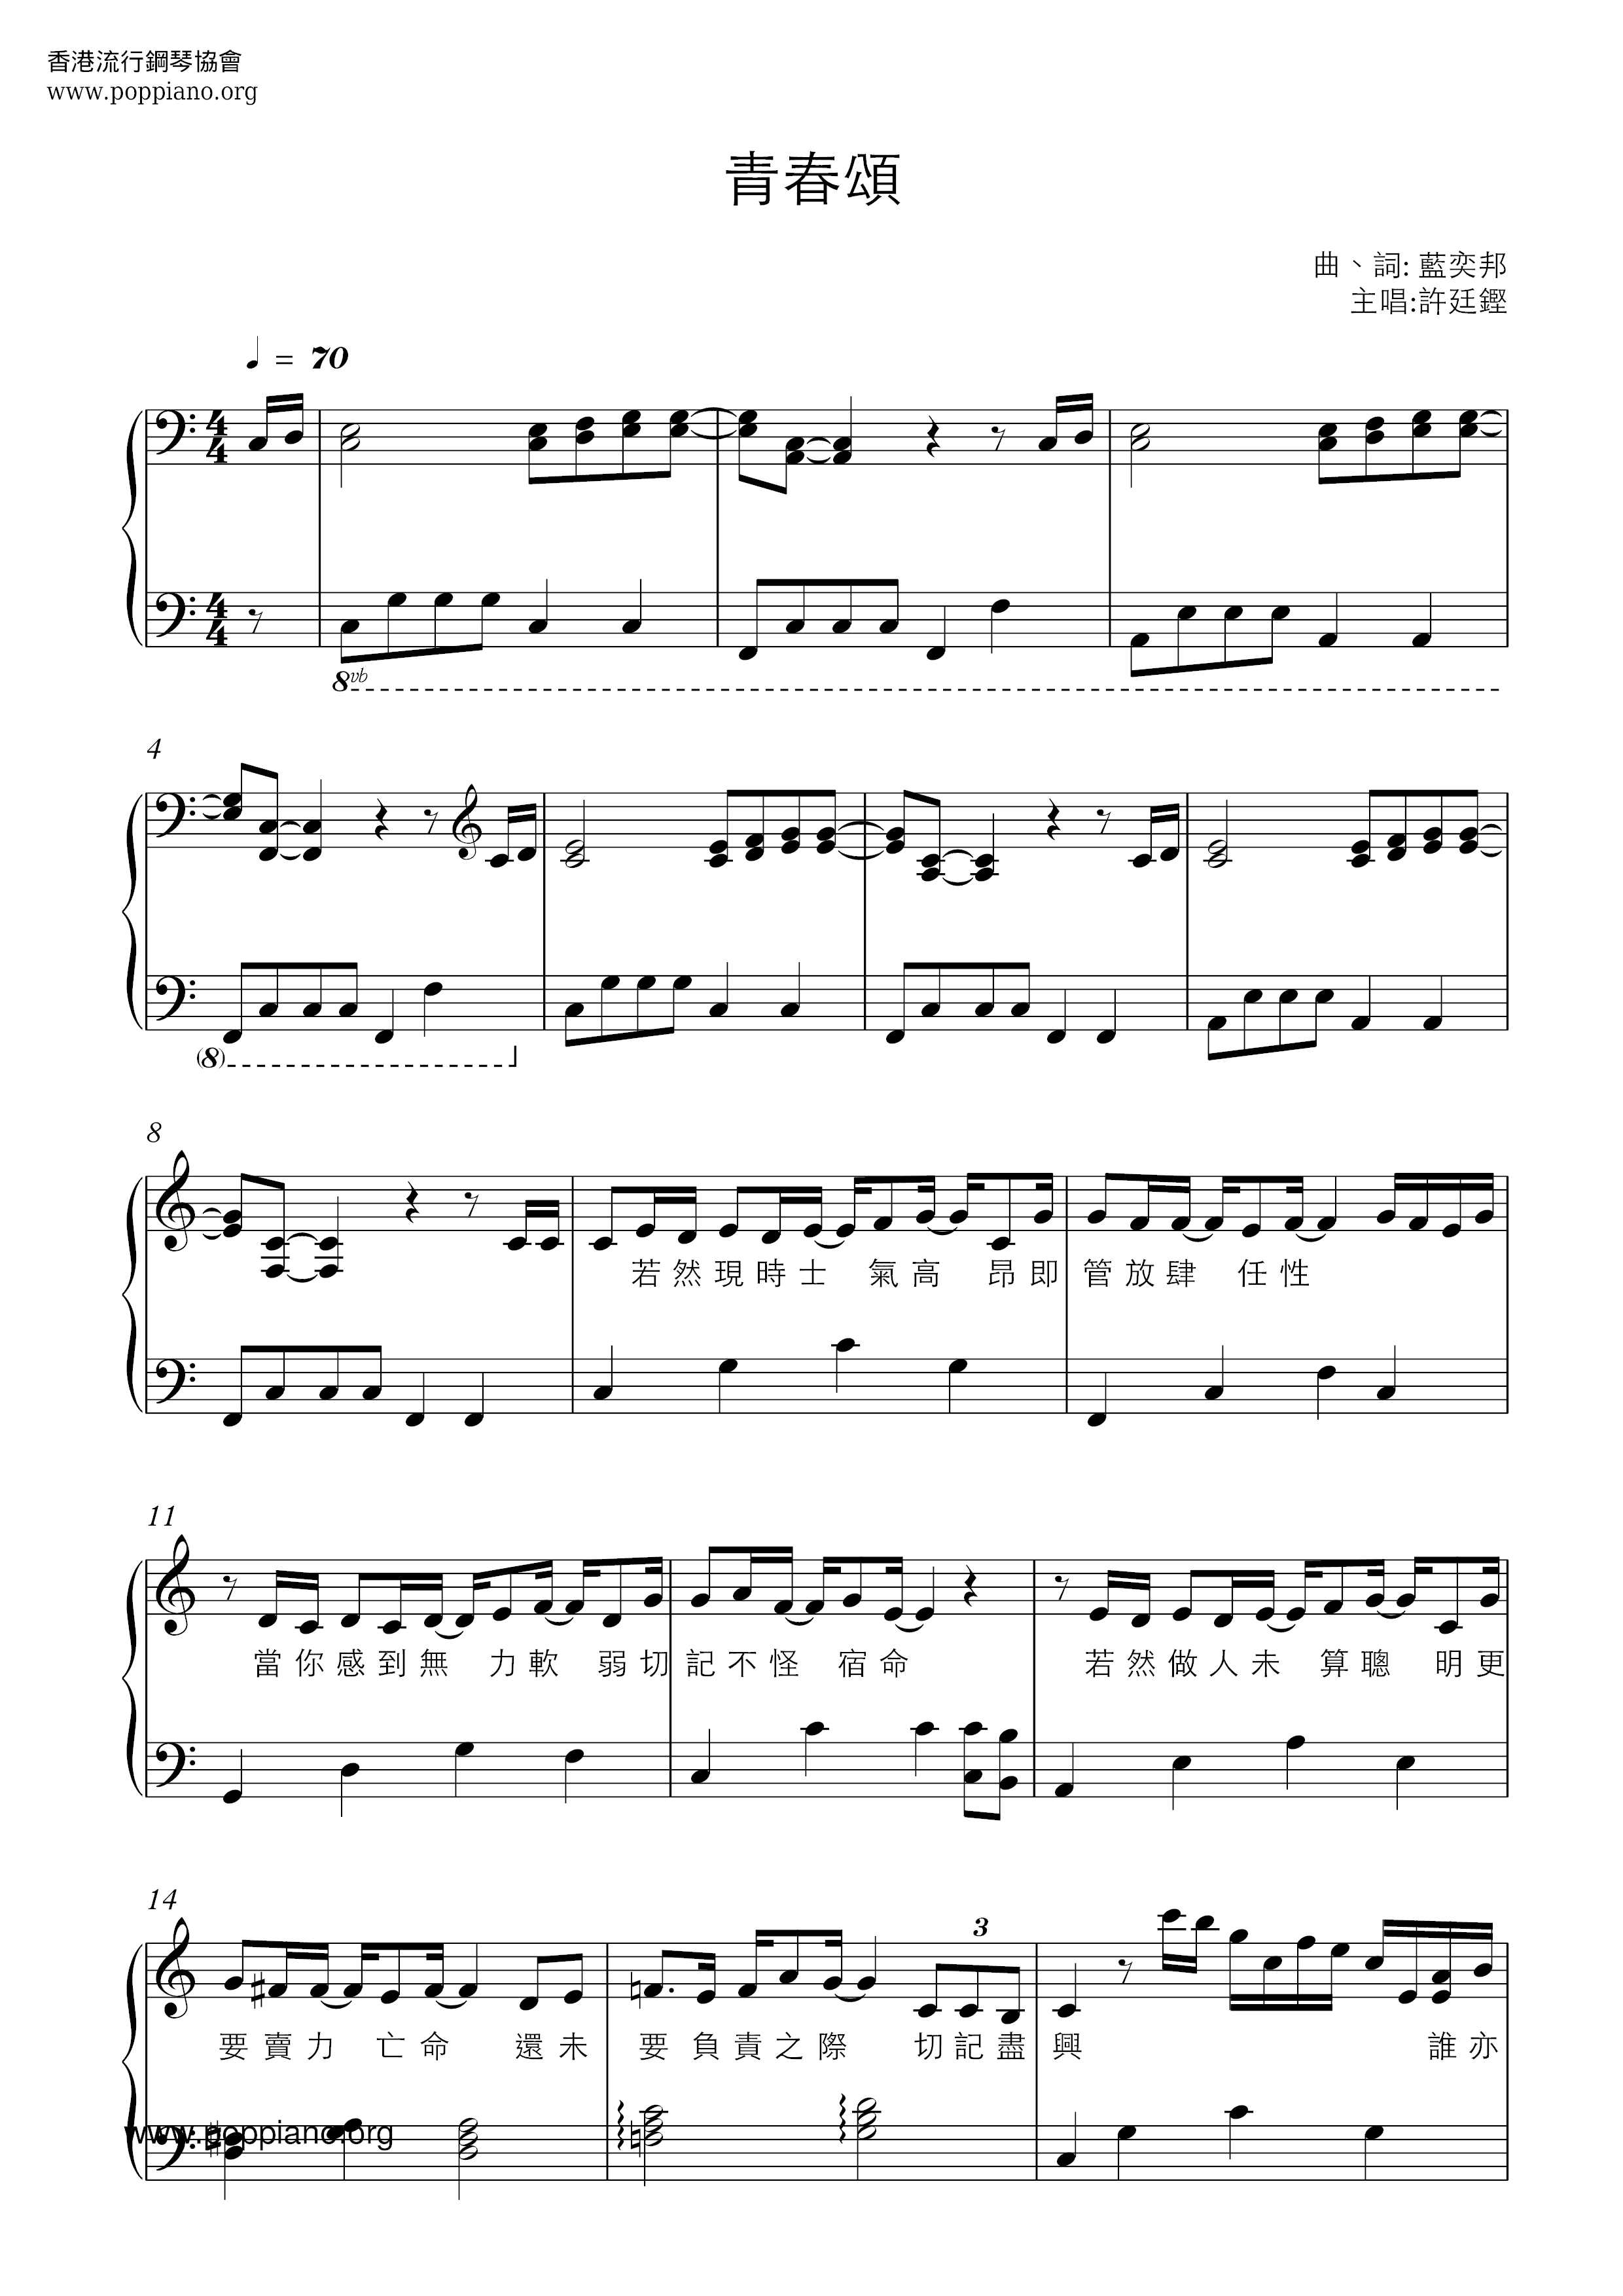 Ode To Youth Score